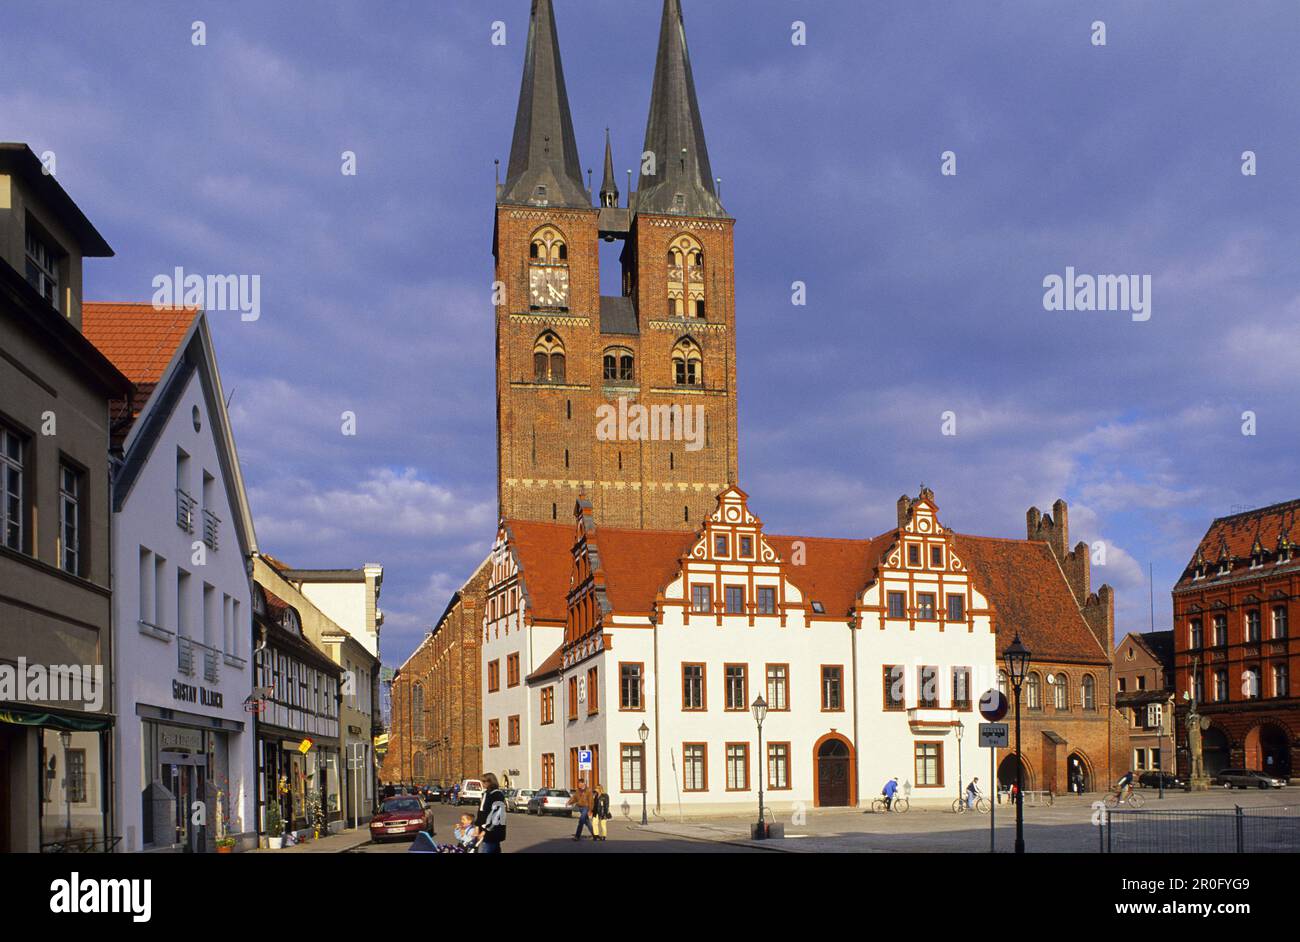 Market square with St. Mary's Church and town hall, Stendal, Saxony-Anhalt, Germany Stock Photo